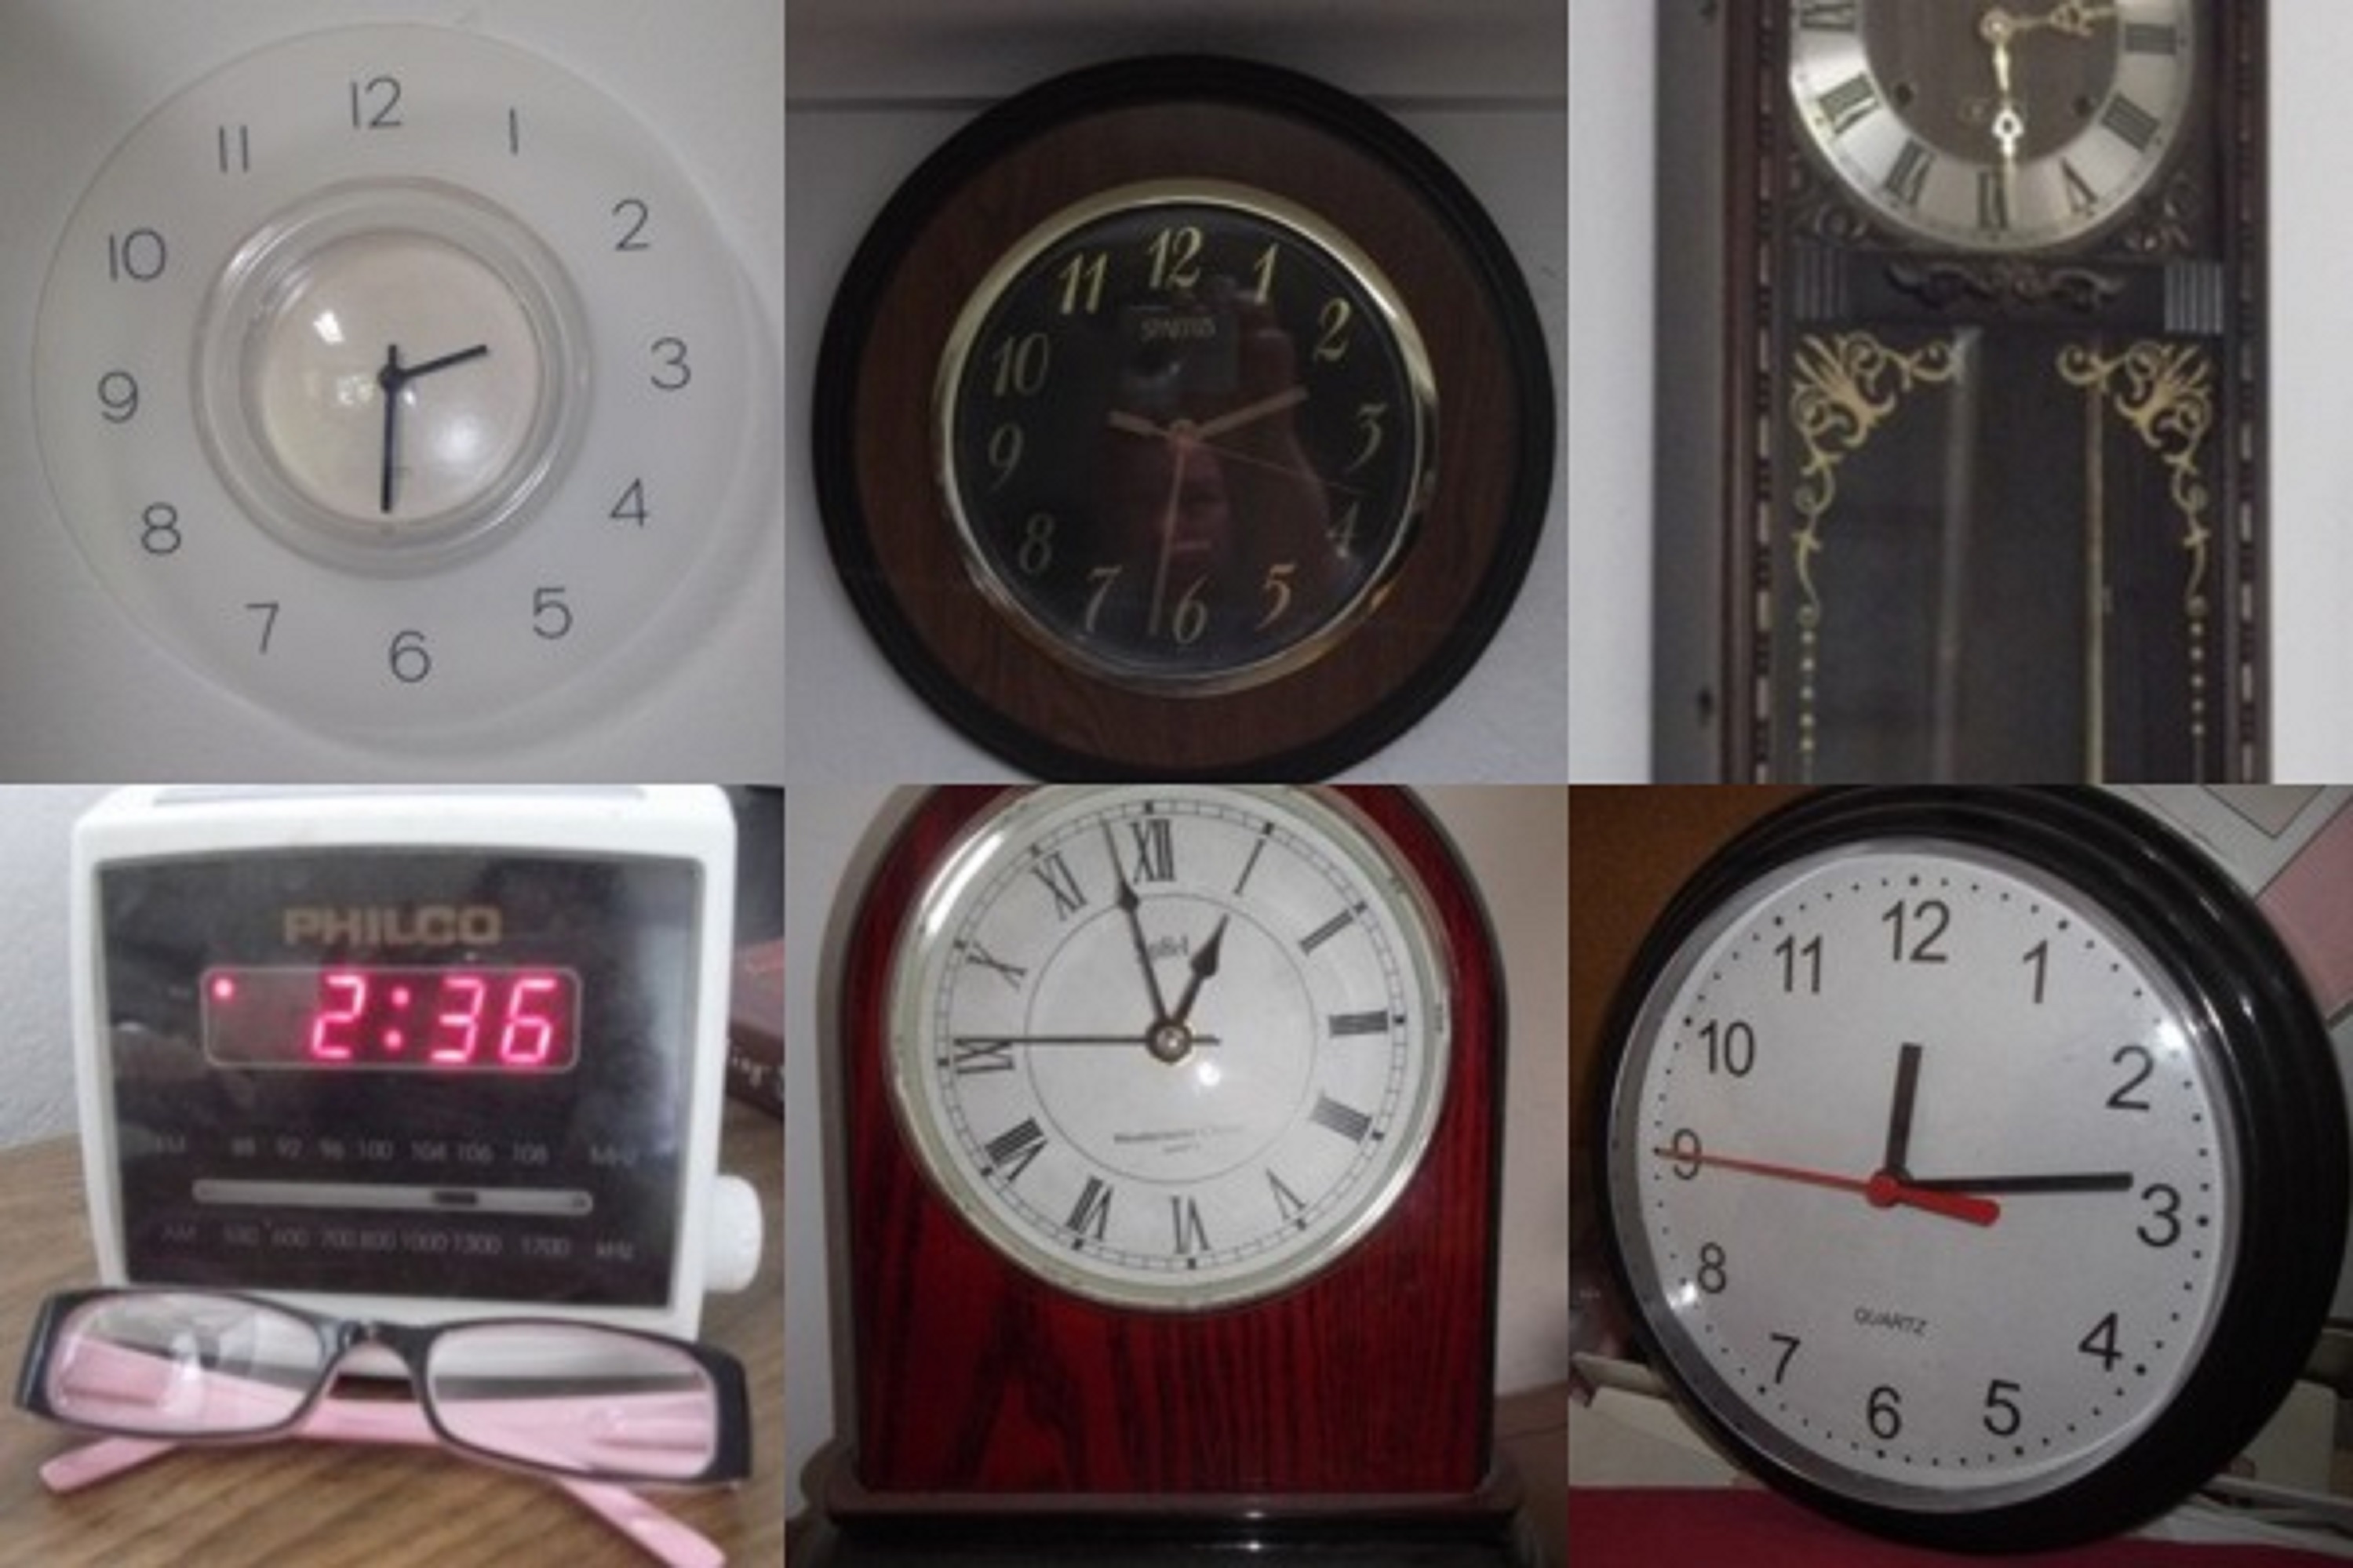 Photos taken by me of the clocks in the house made into a collage